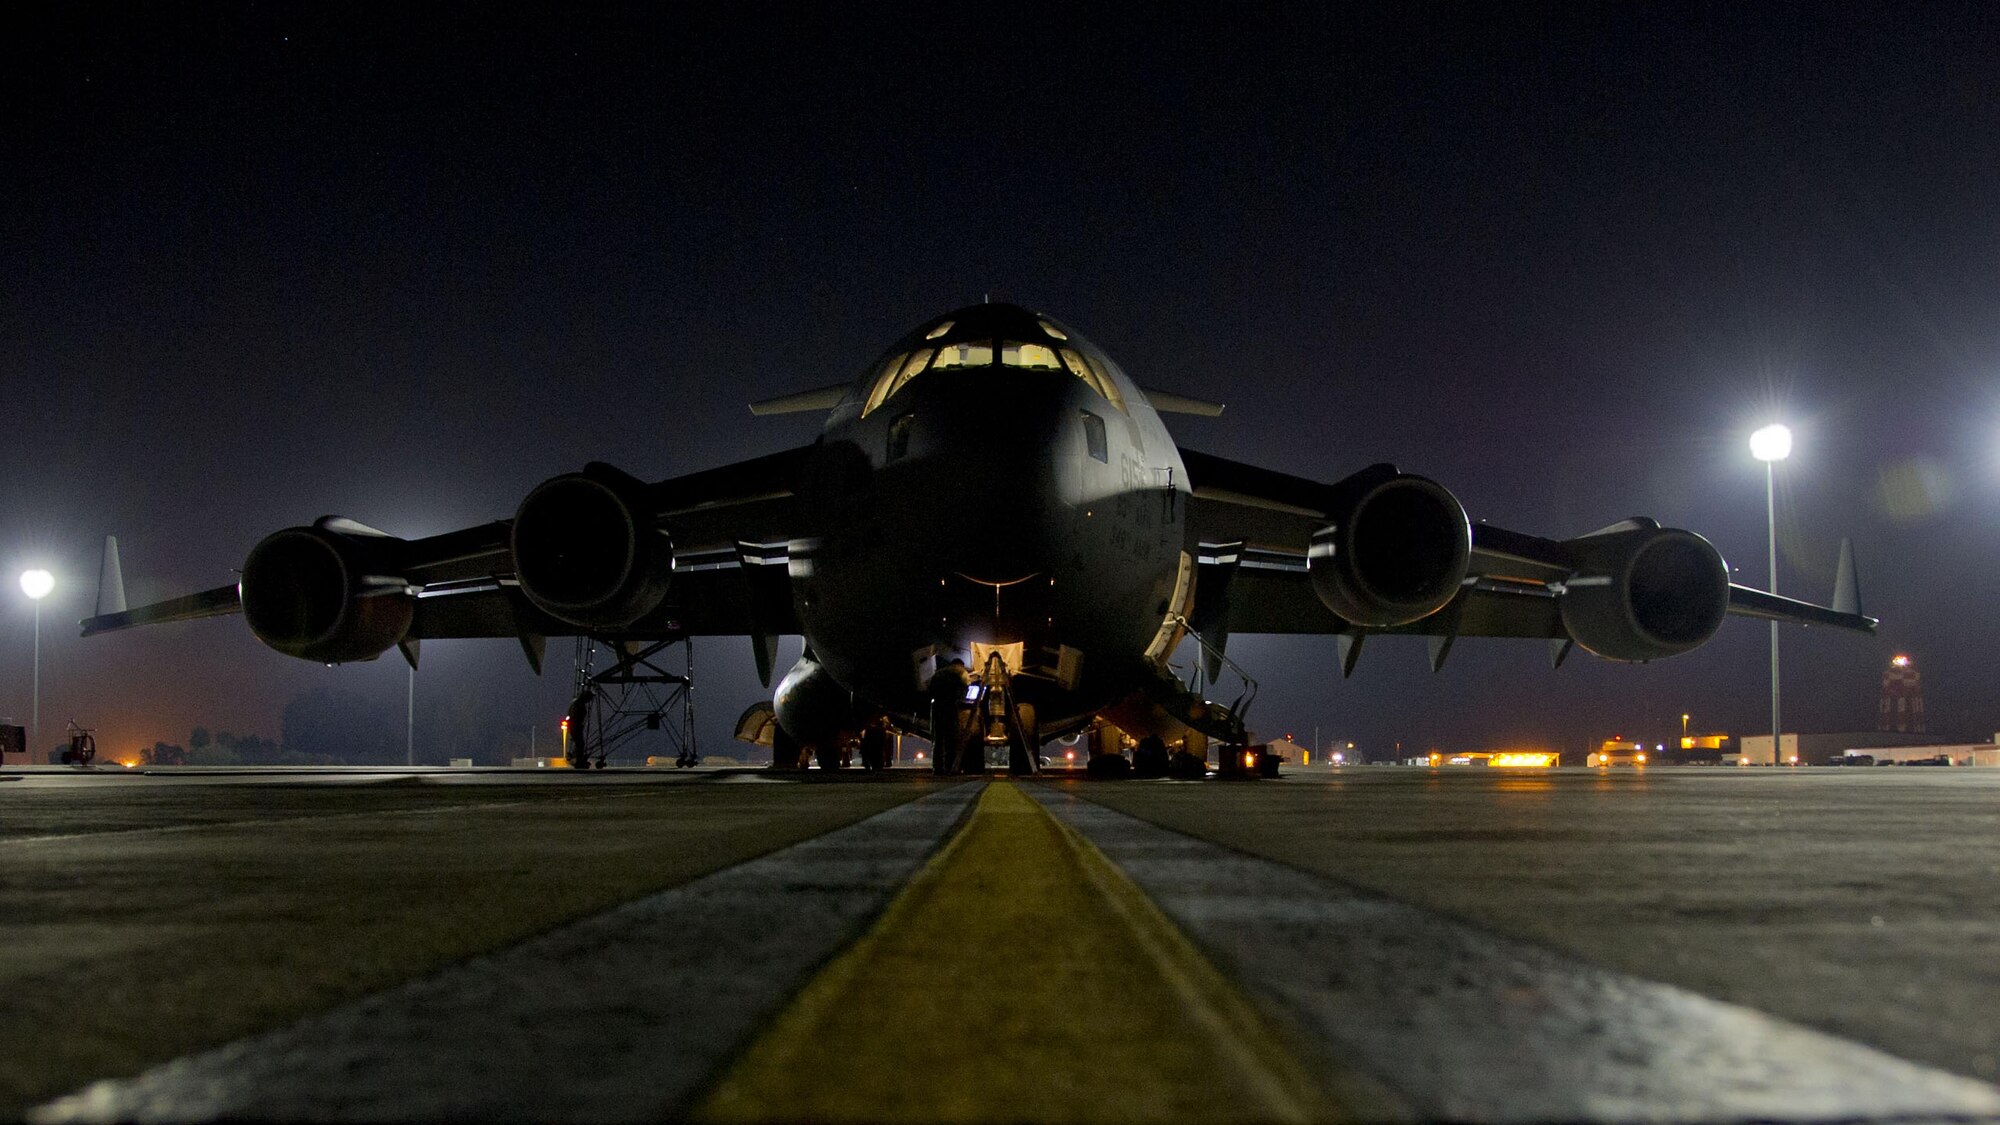 A C-17 Globemaster III rests on the flight line at Naval Station Rota, Spain while being run through an inspection by 446th Aircraft Maintenance Squadron Reservists February 23, 2016. The Reservists were at Rota assisting the 725th Air Mobility Squadron as part of an annual training requirement. (U.S. Air Force Reserve photo by Staff Sgt. Madelyn McCullough)